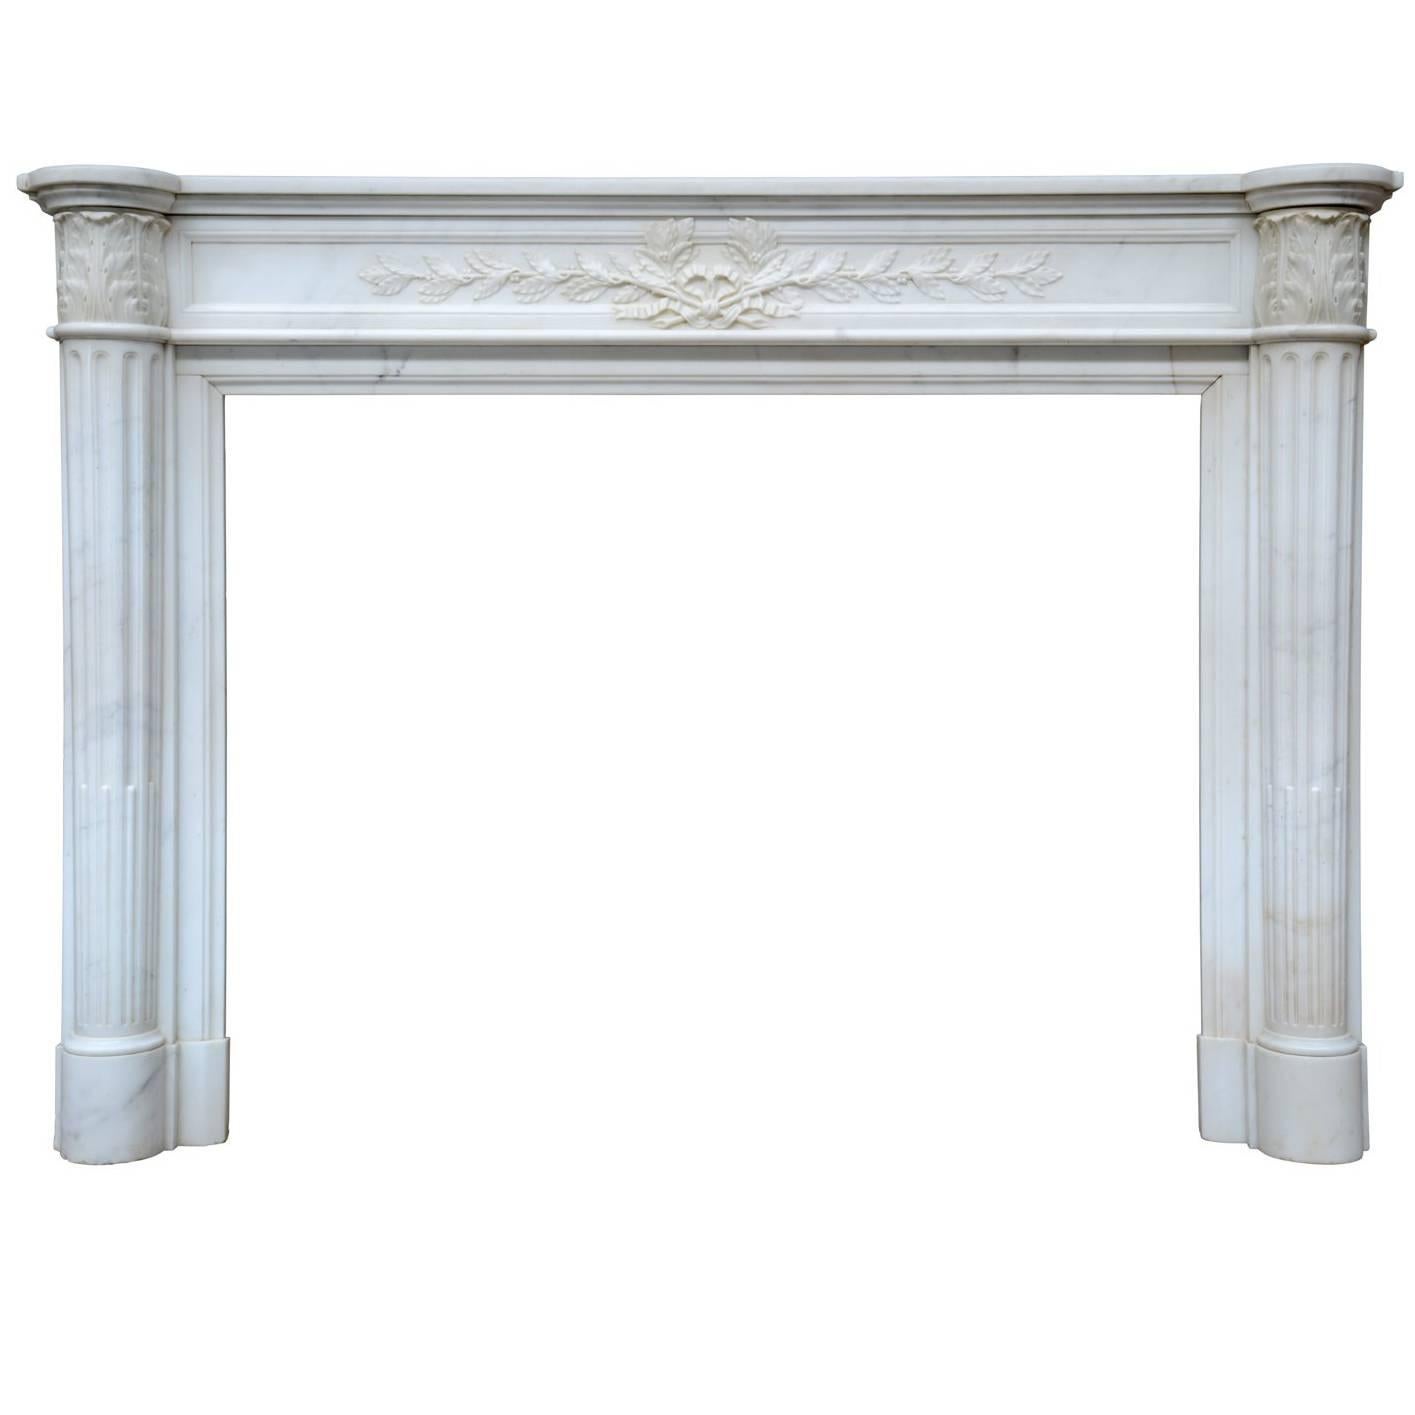 Louis XVI Style White Semi-Statuary Marble Fireplace For Sale